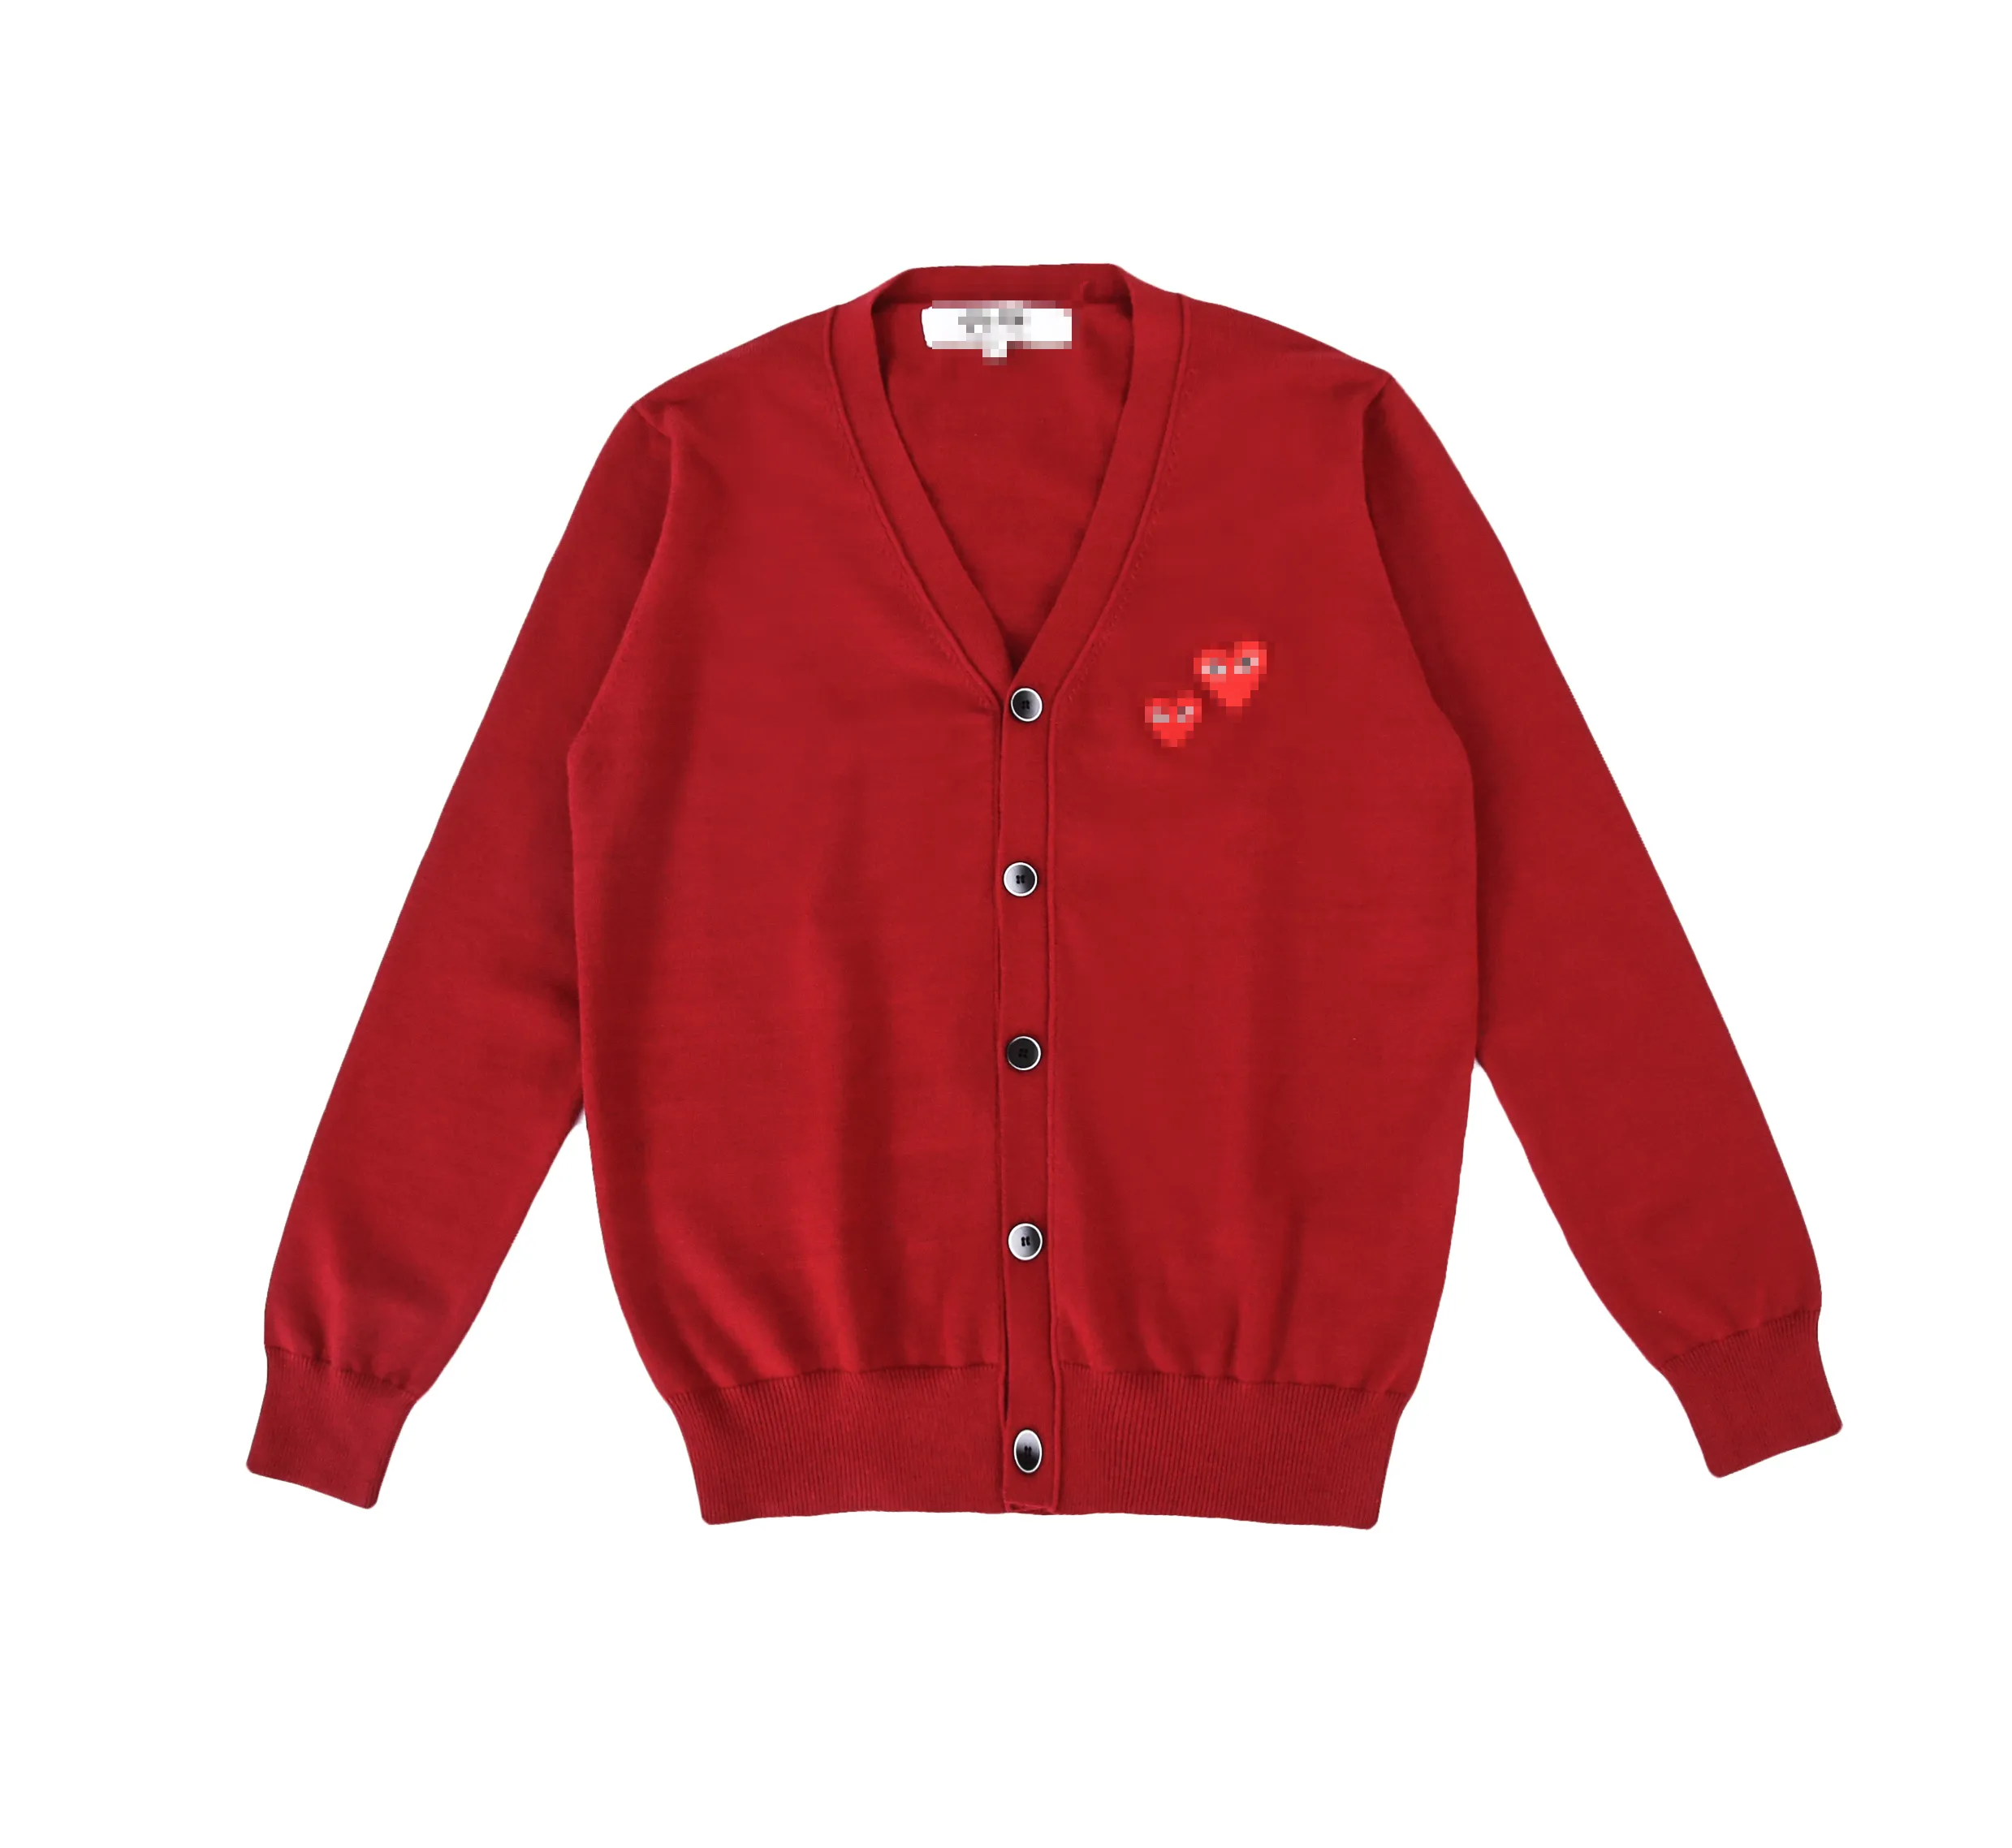 Designer Men's Sweaters CDG Com Des Garcons Play Women's Red Hearts Sweater Red Button Wool V Neck Cardigan Size XL